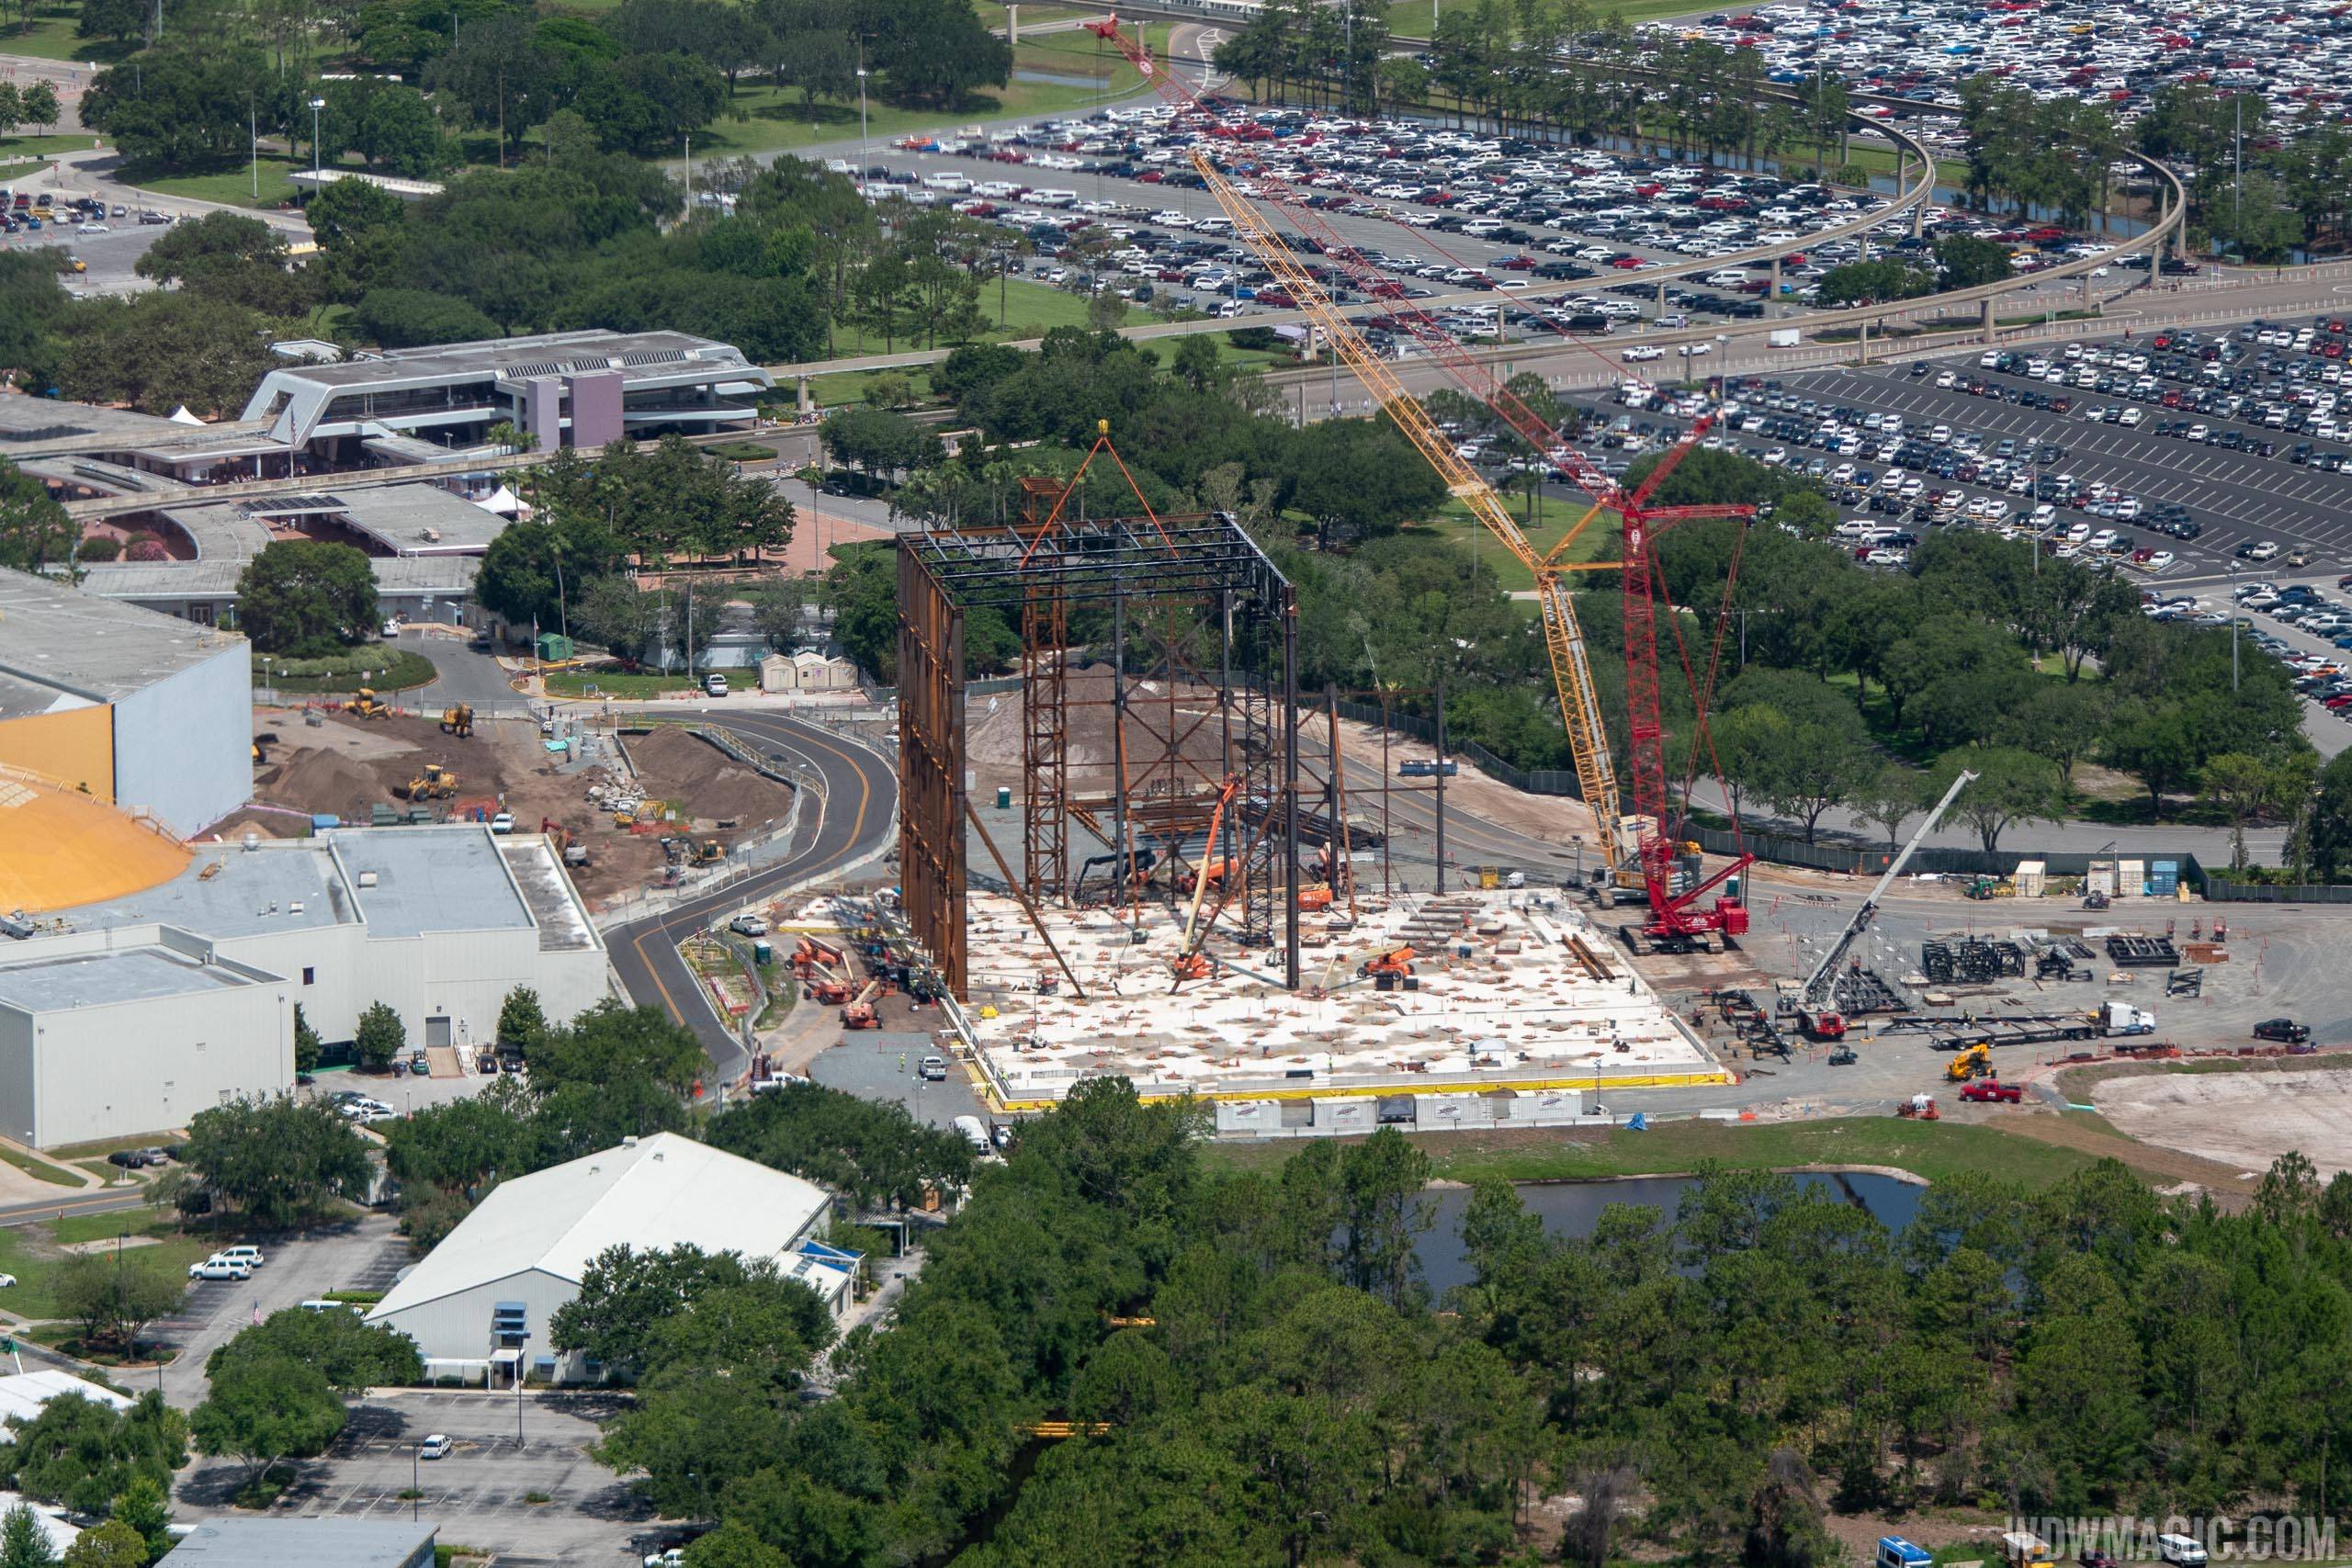 PHOTOS - Guardians of the Galaxy rollercoaster aerial view